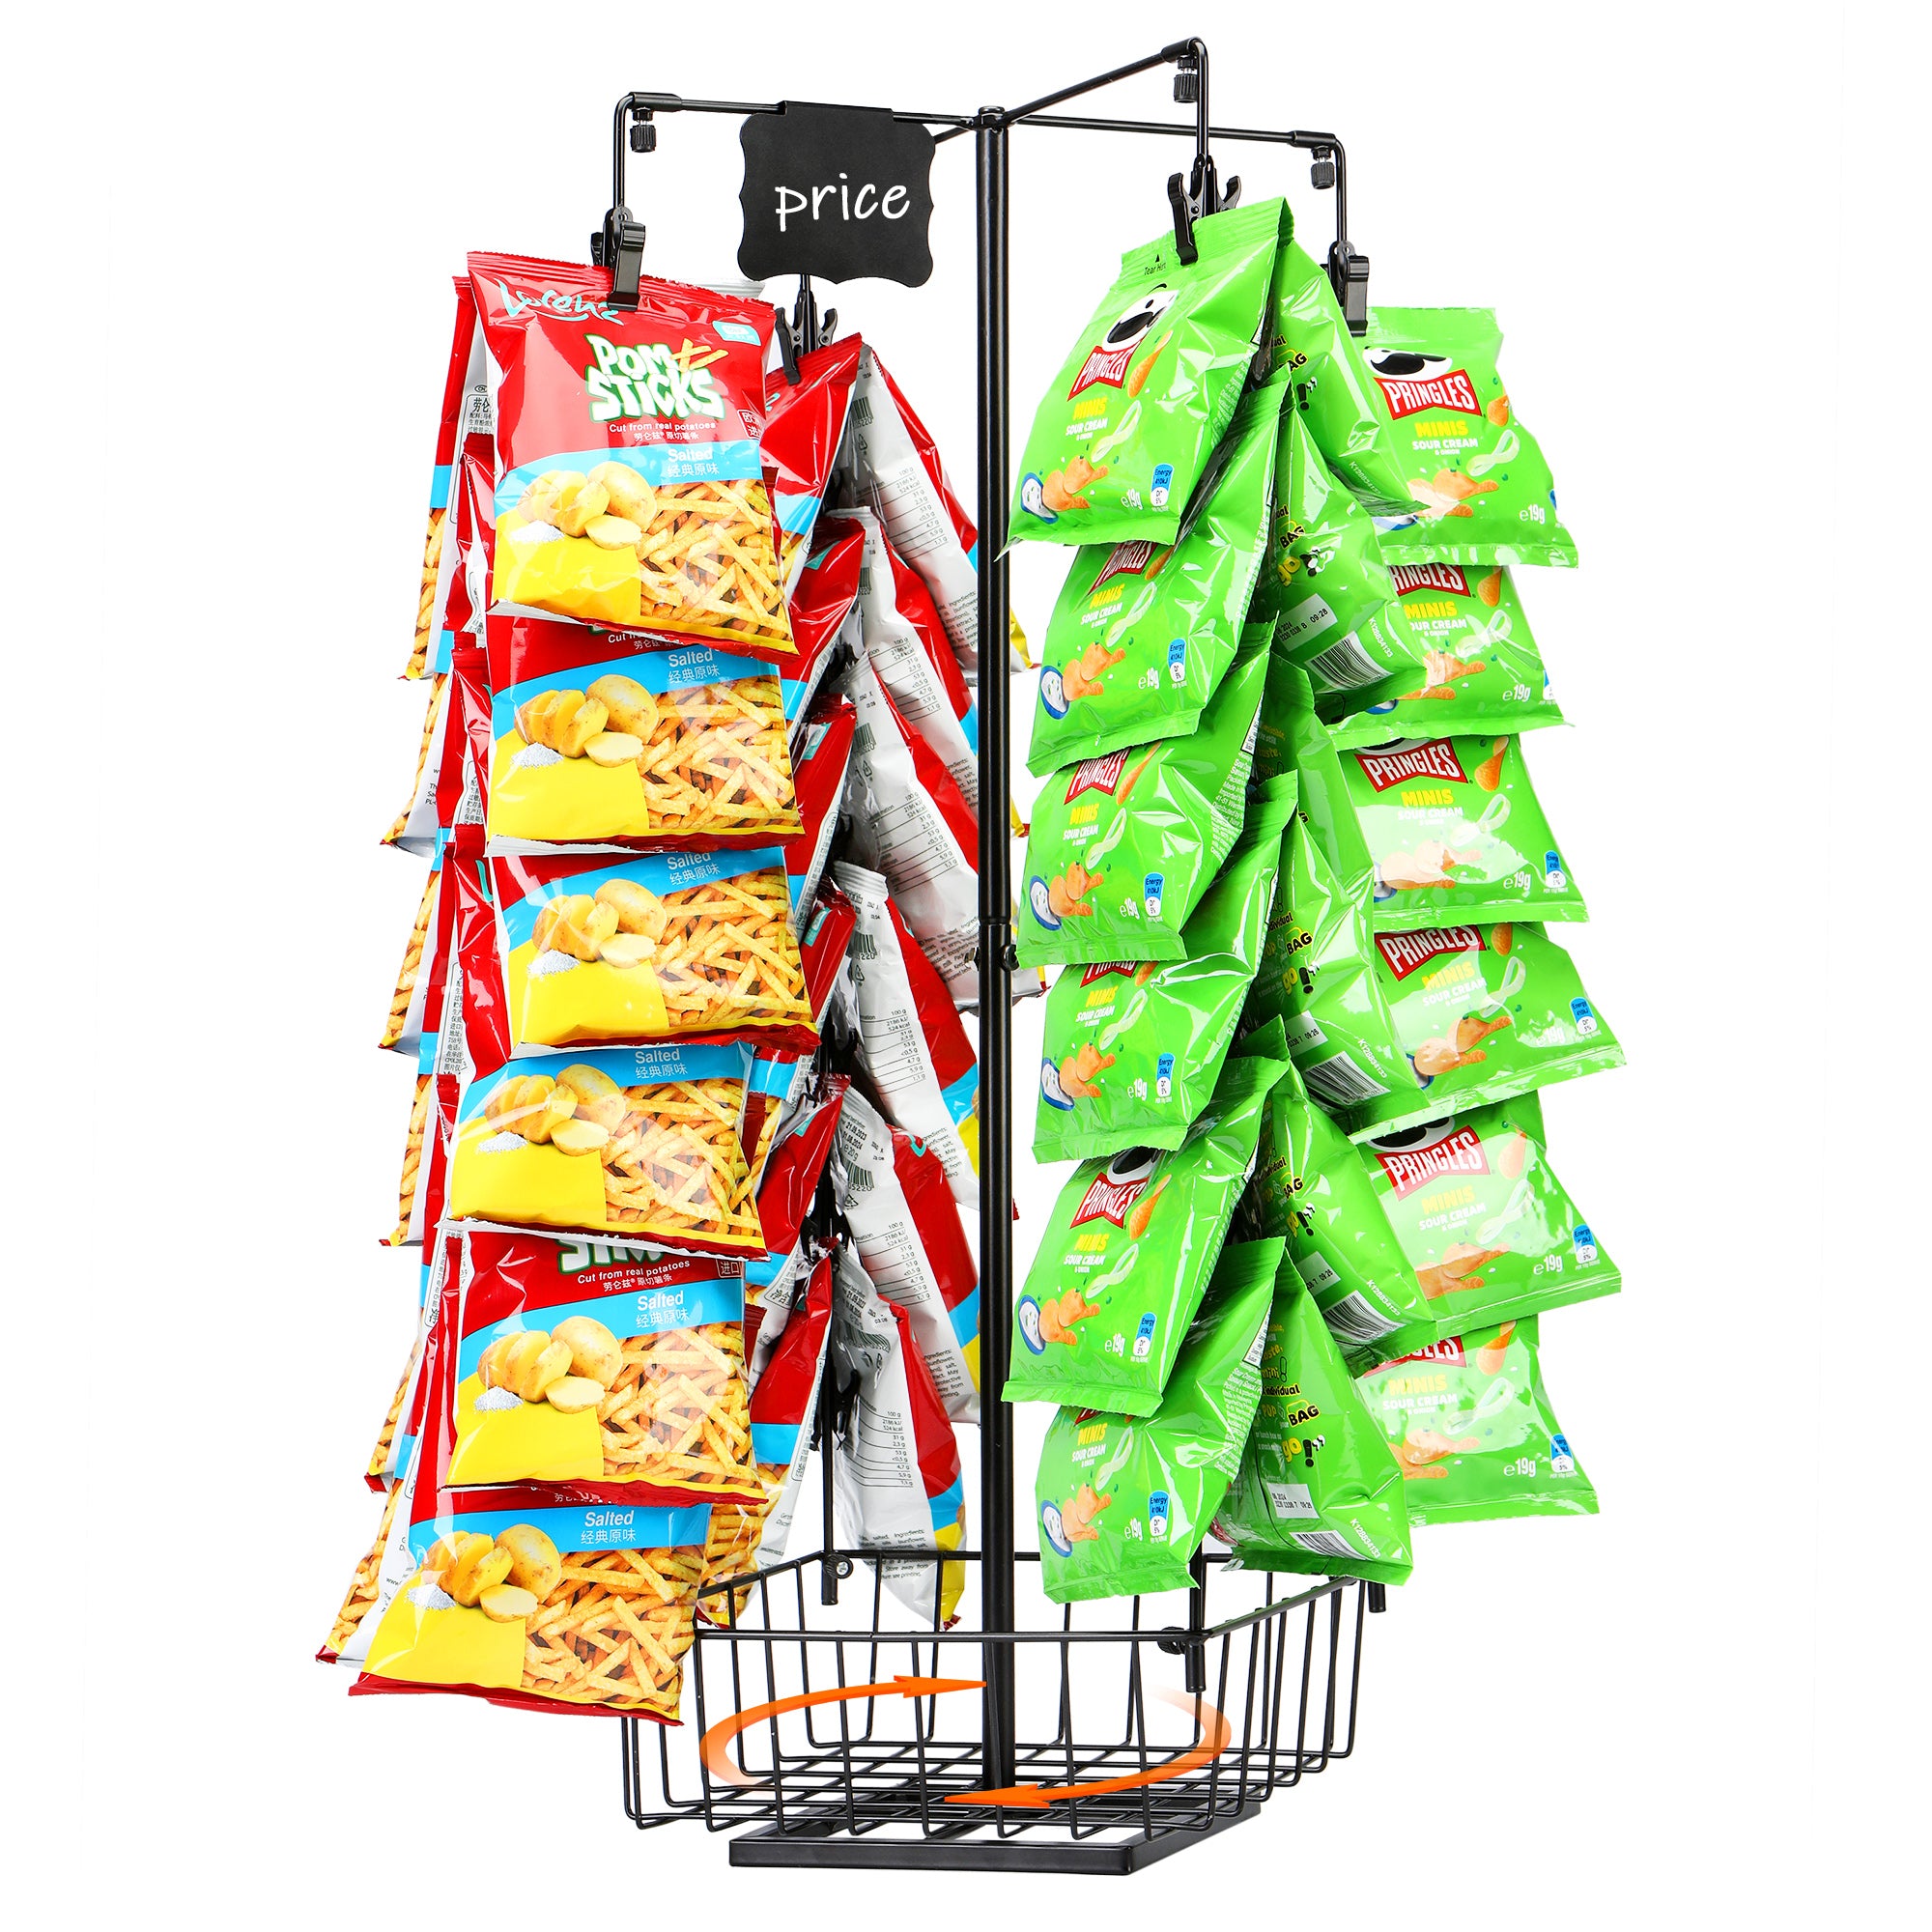 GADFISH Chip Rack Display Stand with Basket, 4-Row 56 Clips Snack Retail Display Rack, 360° Rotation Black Chip Holder Candy Display Rack Organizer for Pantry, Party, Countertop, Concession Stand